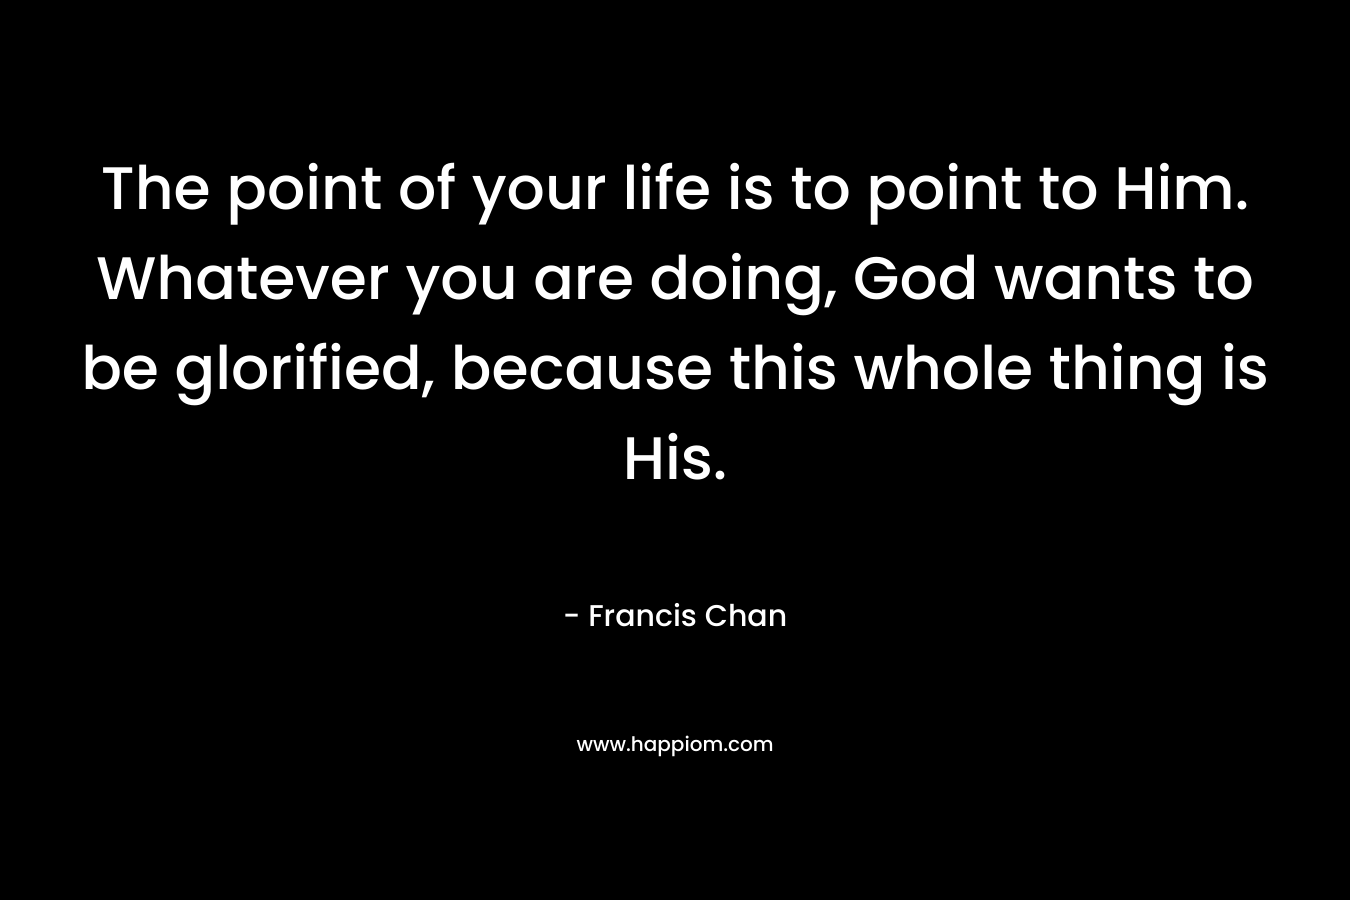 The point of your life is to point to Him. Whatever you are doing, God wants to be glorified, because this whole thing is His. – Francis Chan